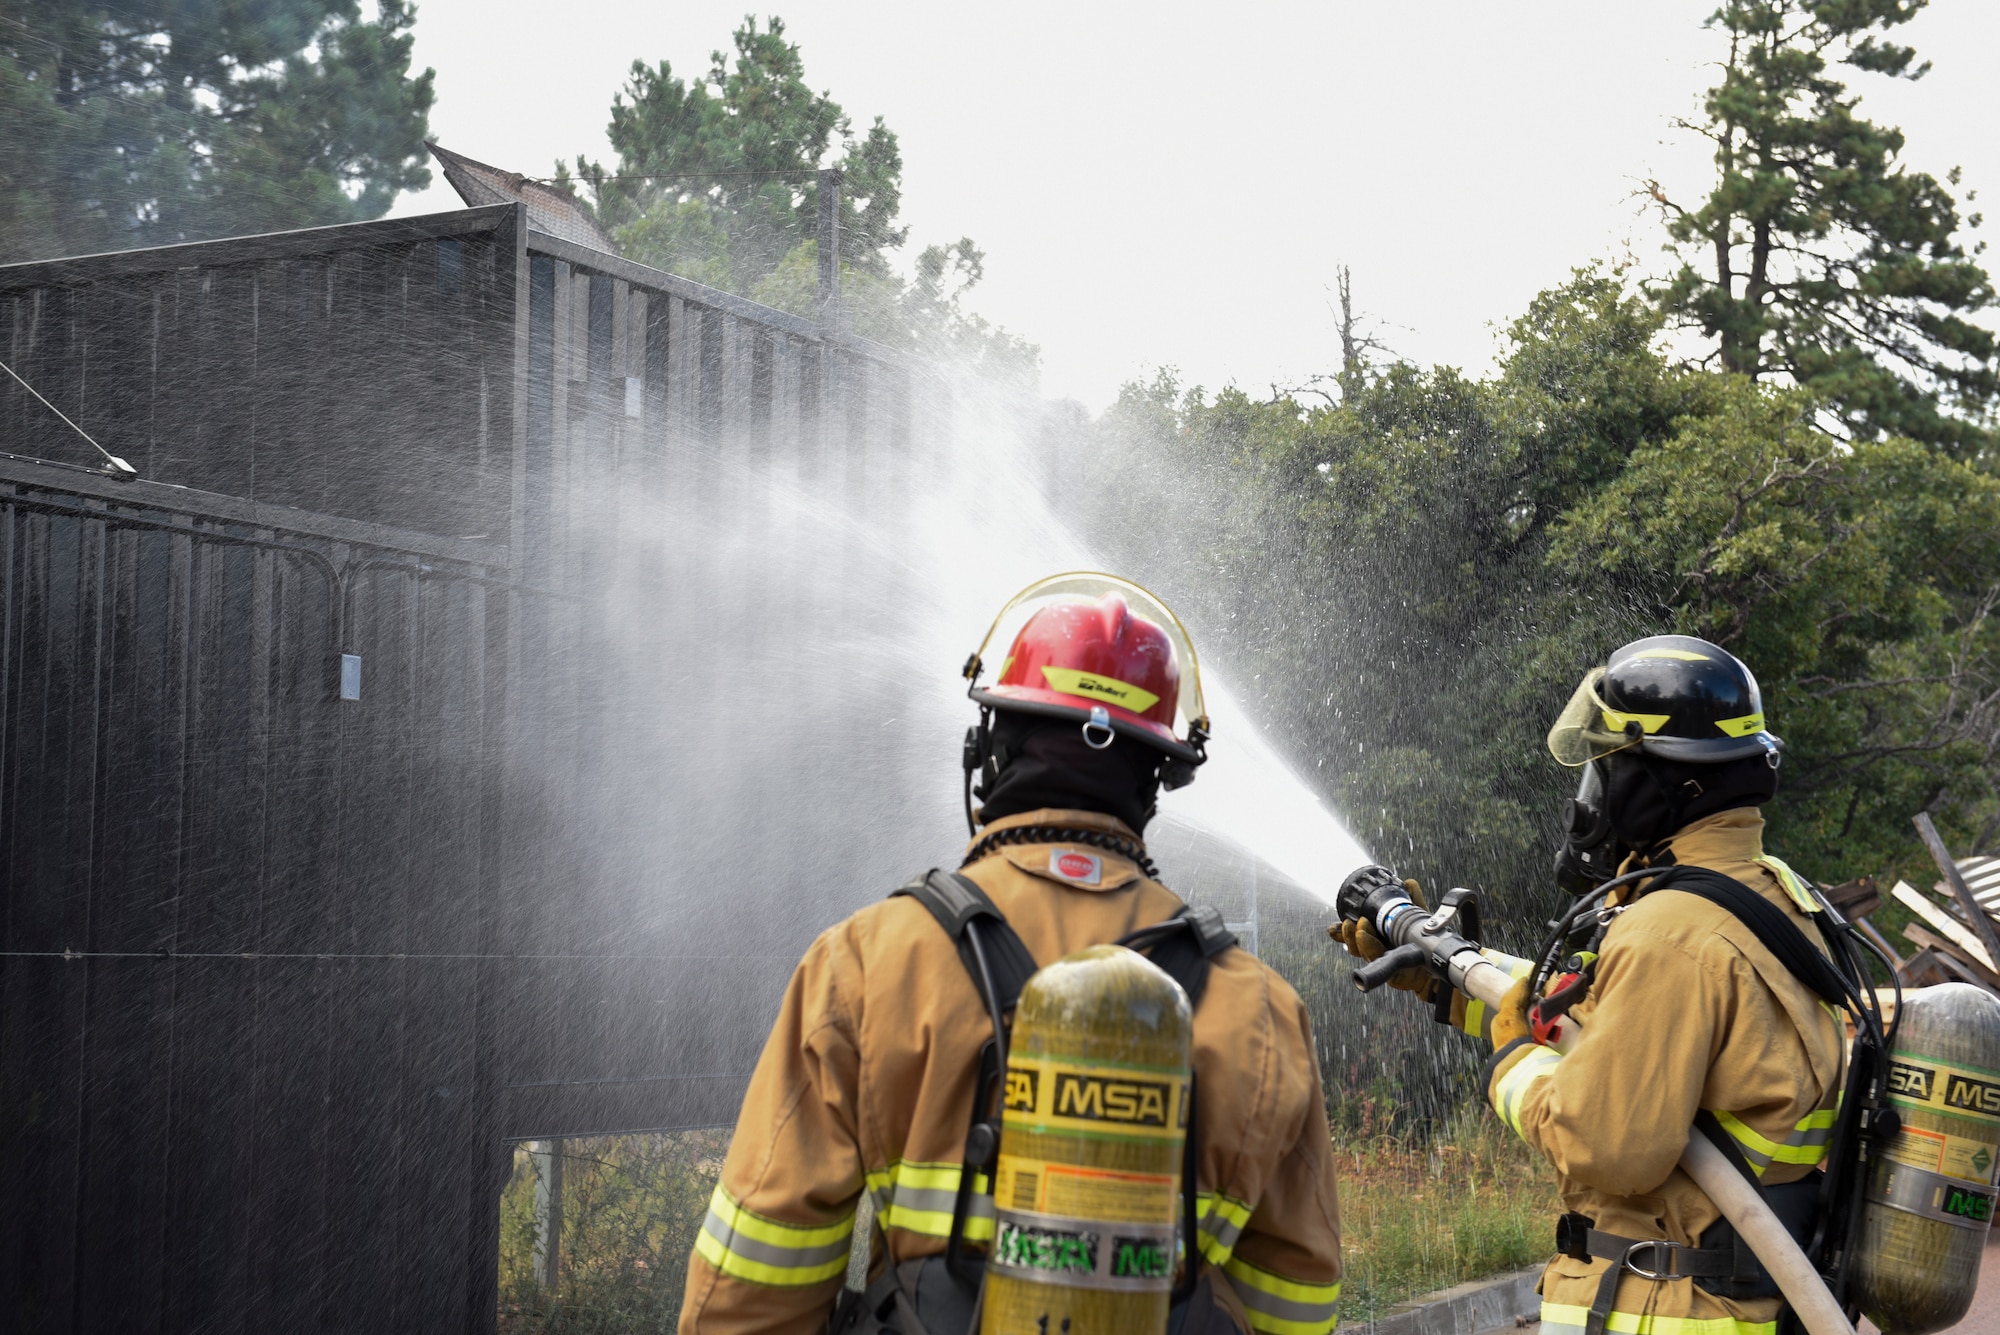 Firefighters at Cheyenne Mountain Air Force Station, Colorado, train in order to fight fires in a variety of settings, Sept. 6, 2019. Their duty station includes 560 acres of forested land and the massive Cheyenne Mountain Complex underneath Cheyenne Mountain. (U.S. Air Force photo by Airman Alexis Christian)